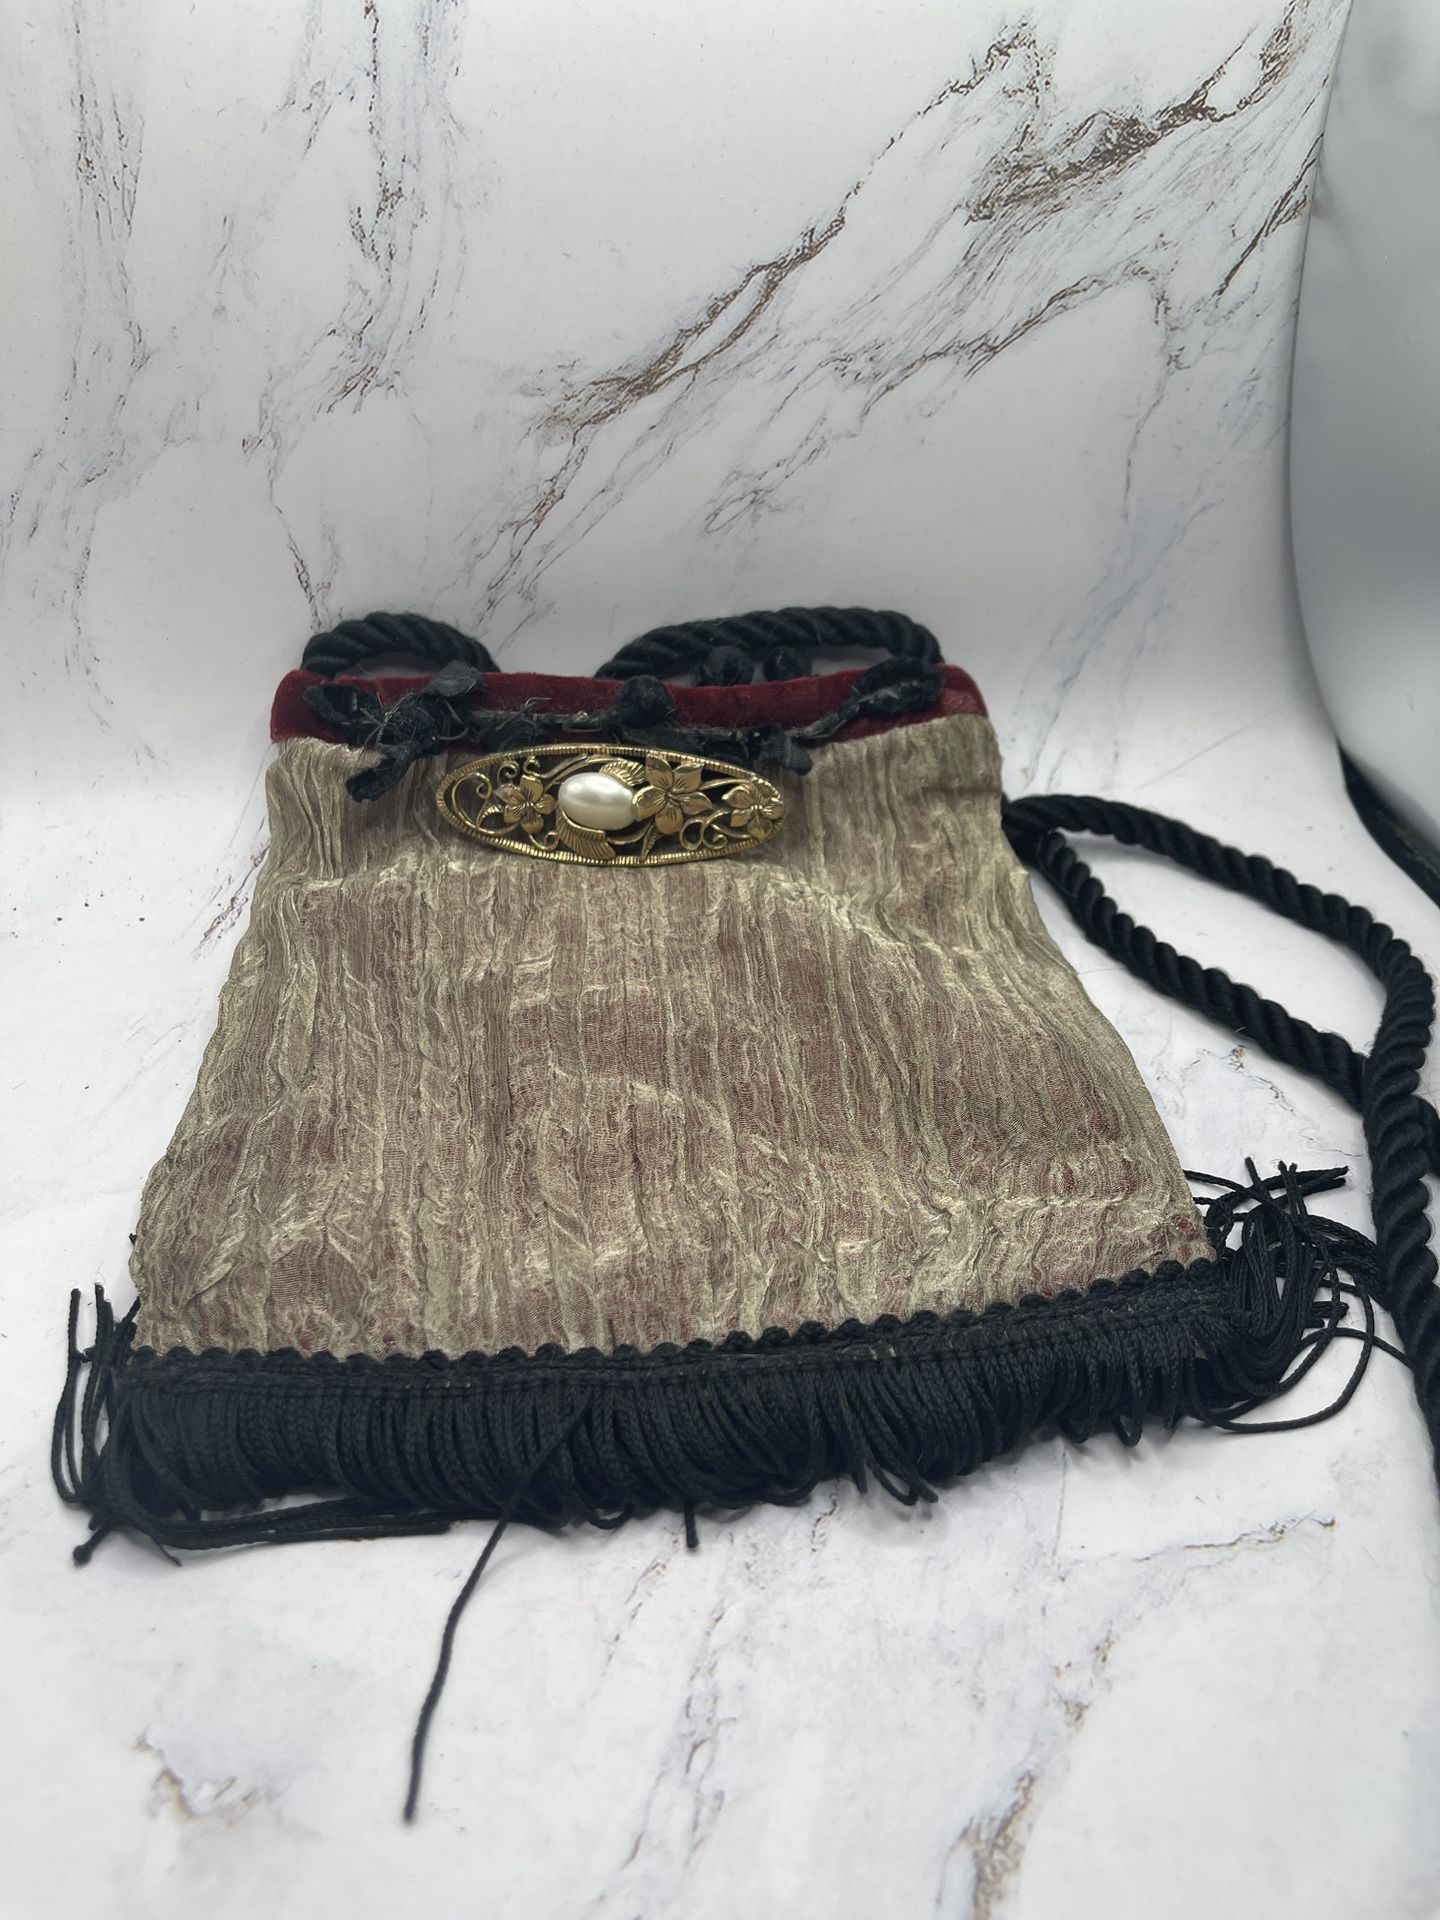 Antique Champagne/Black Opera Bag With Intricate Fringe And Small Roses Details